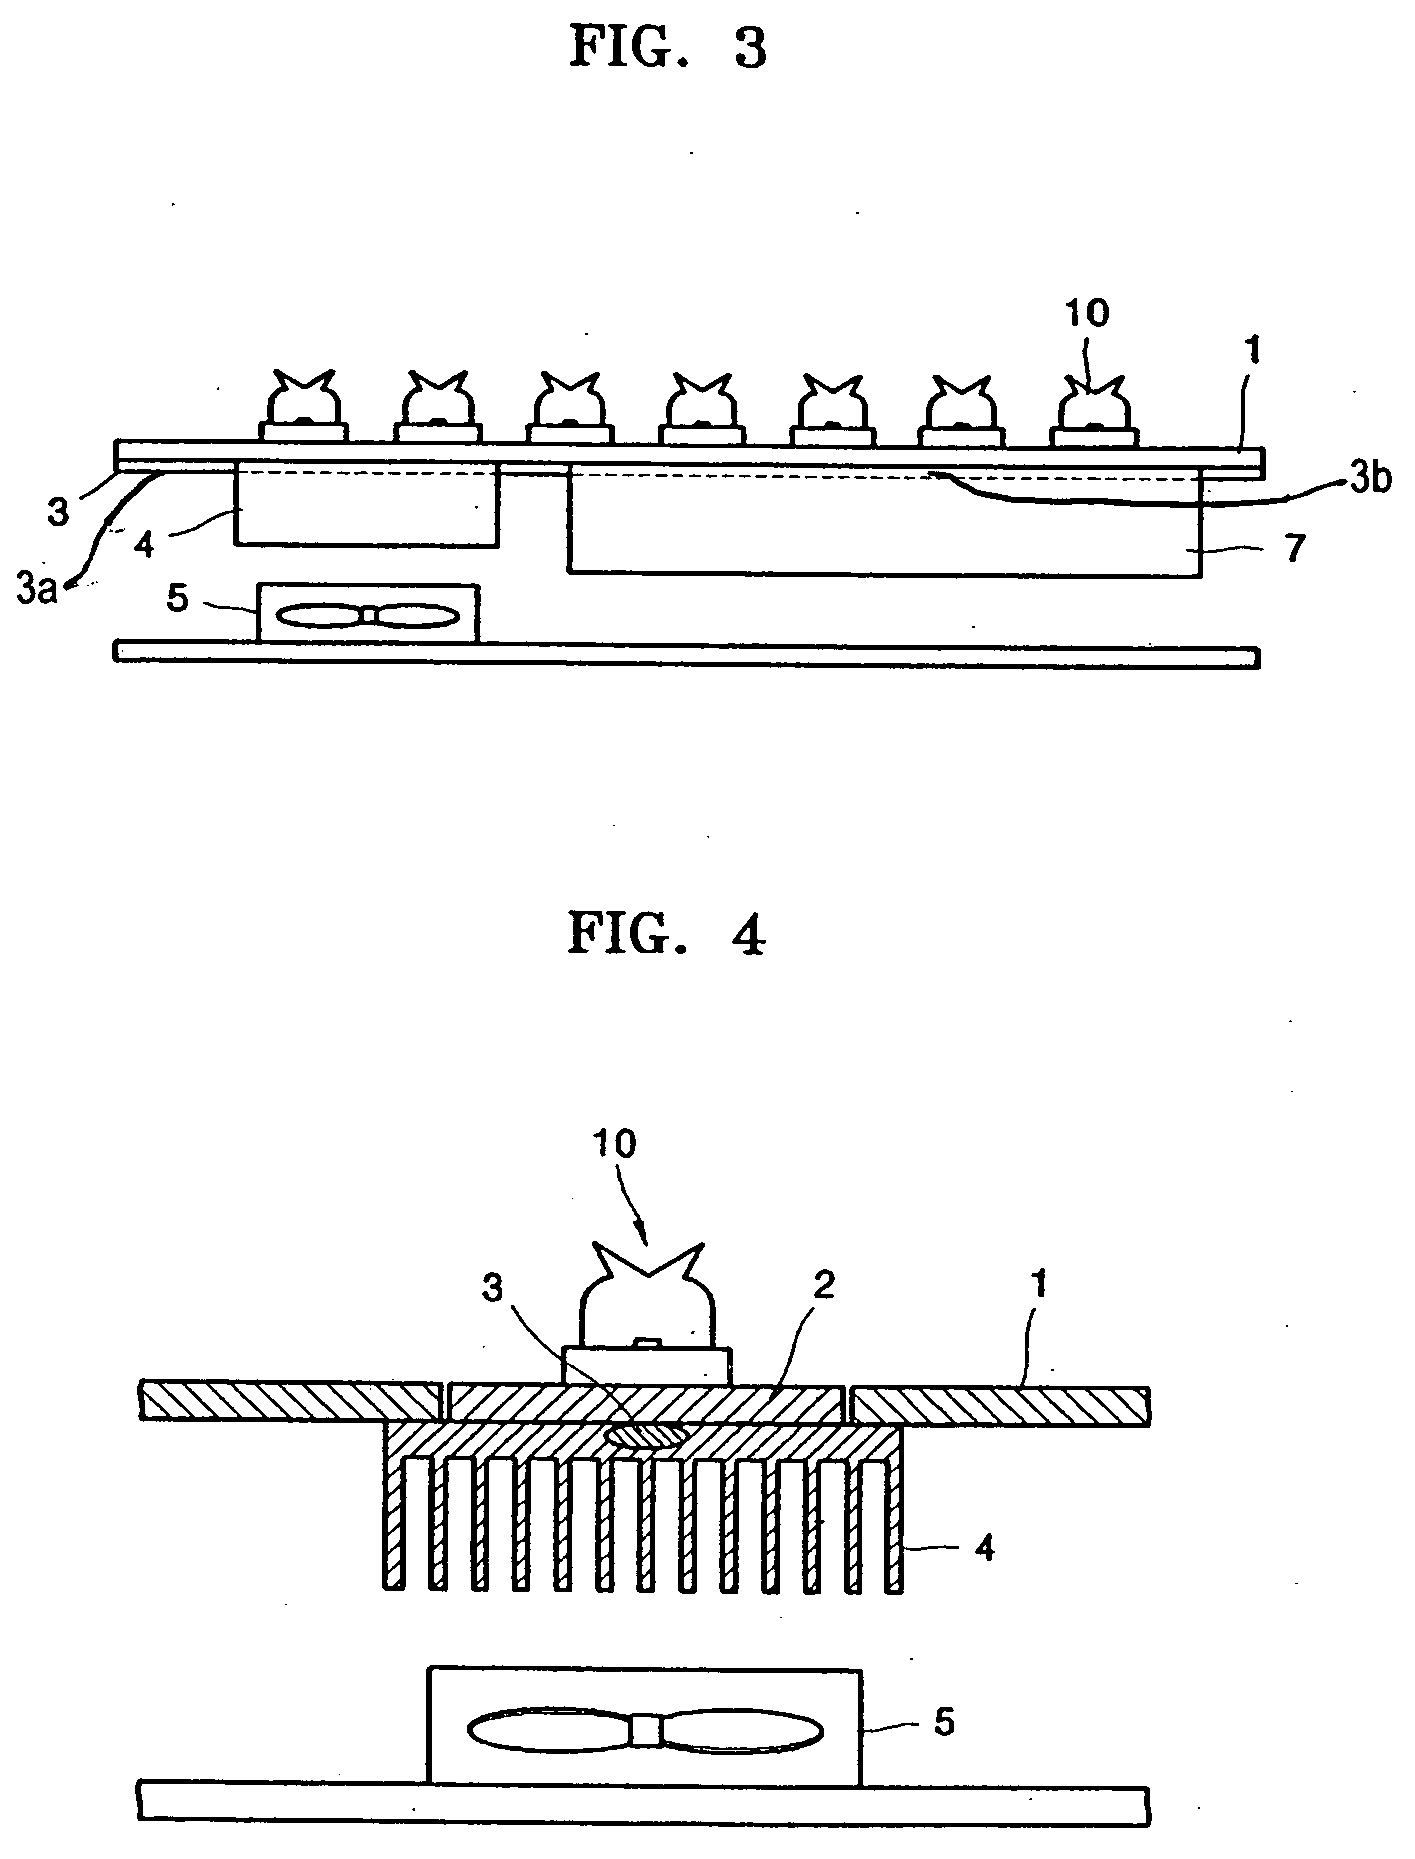 Backlight system and liquid crystal display employing the same